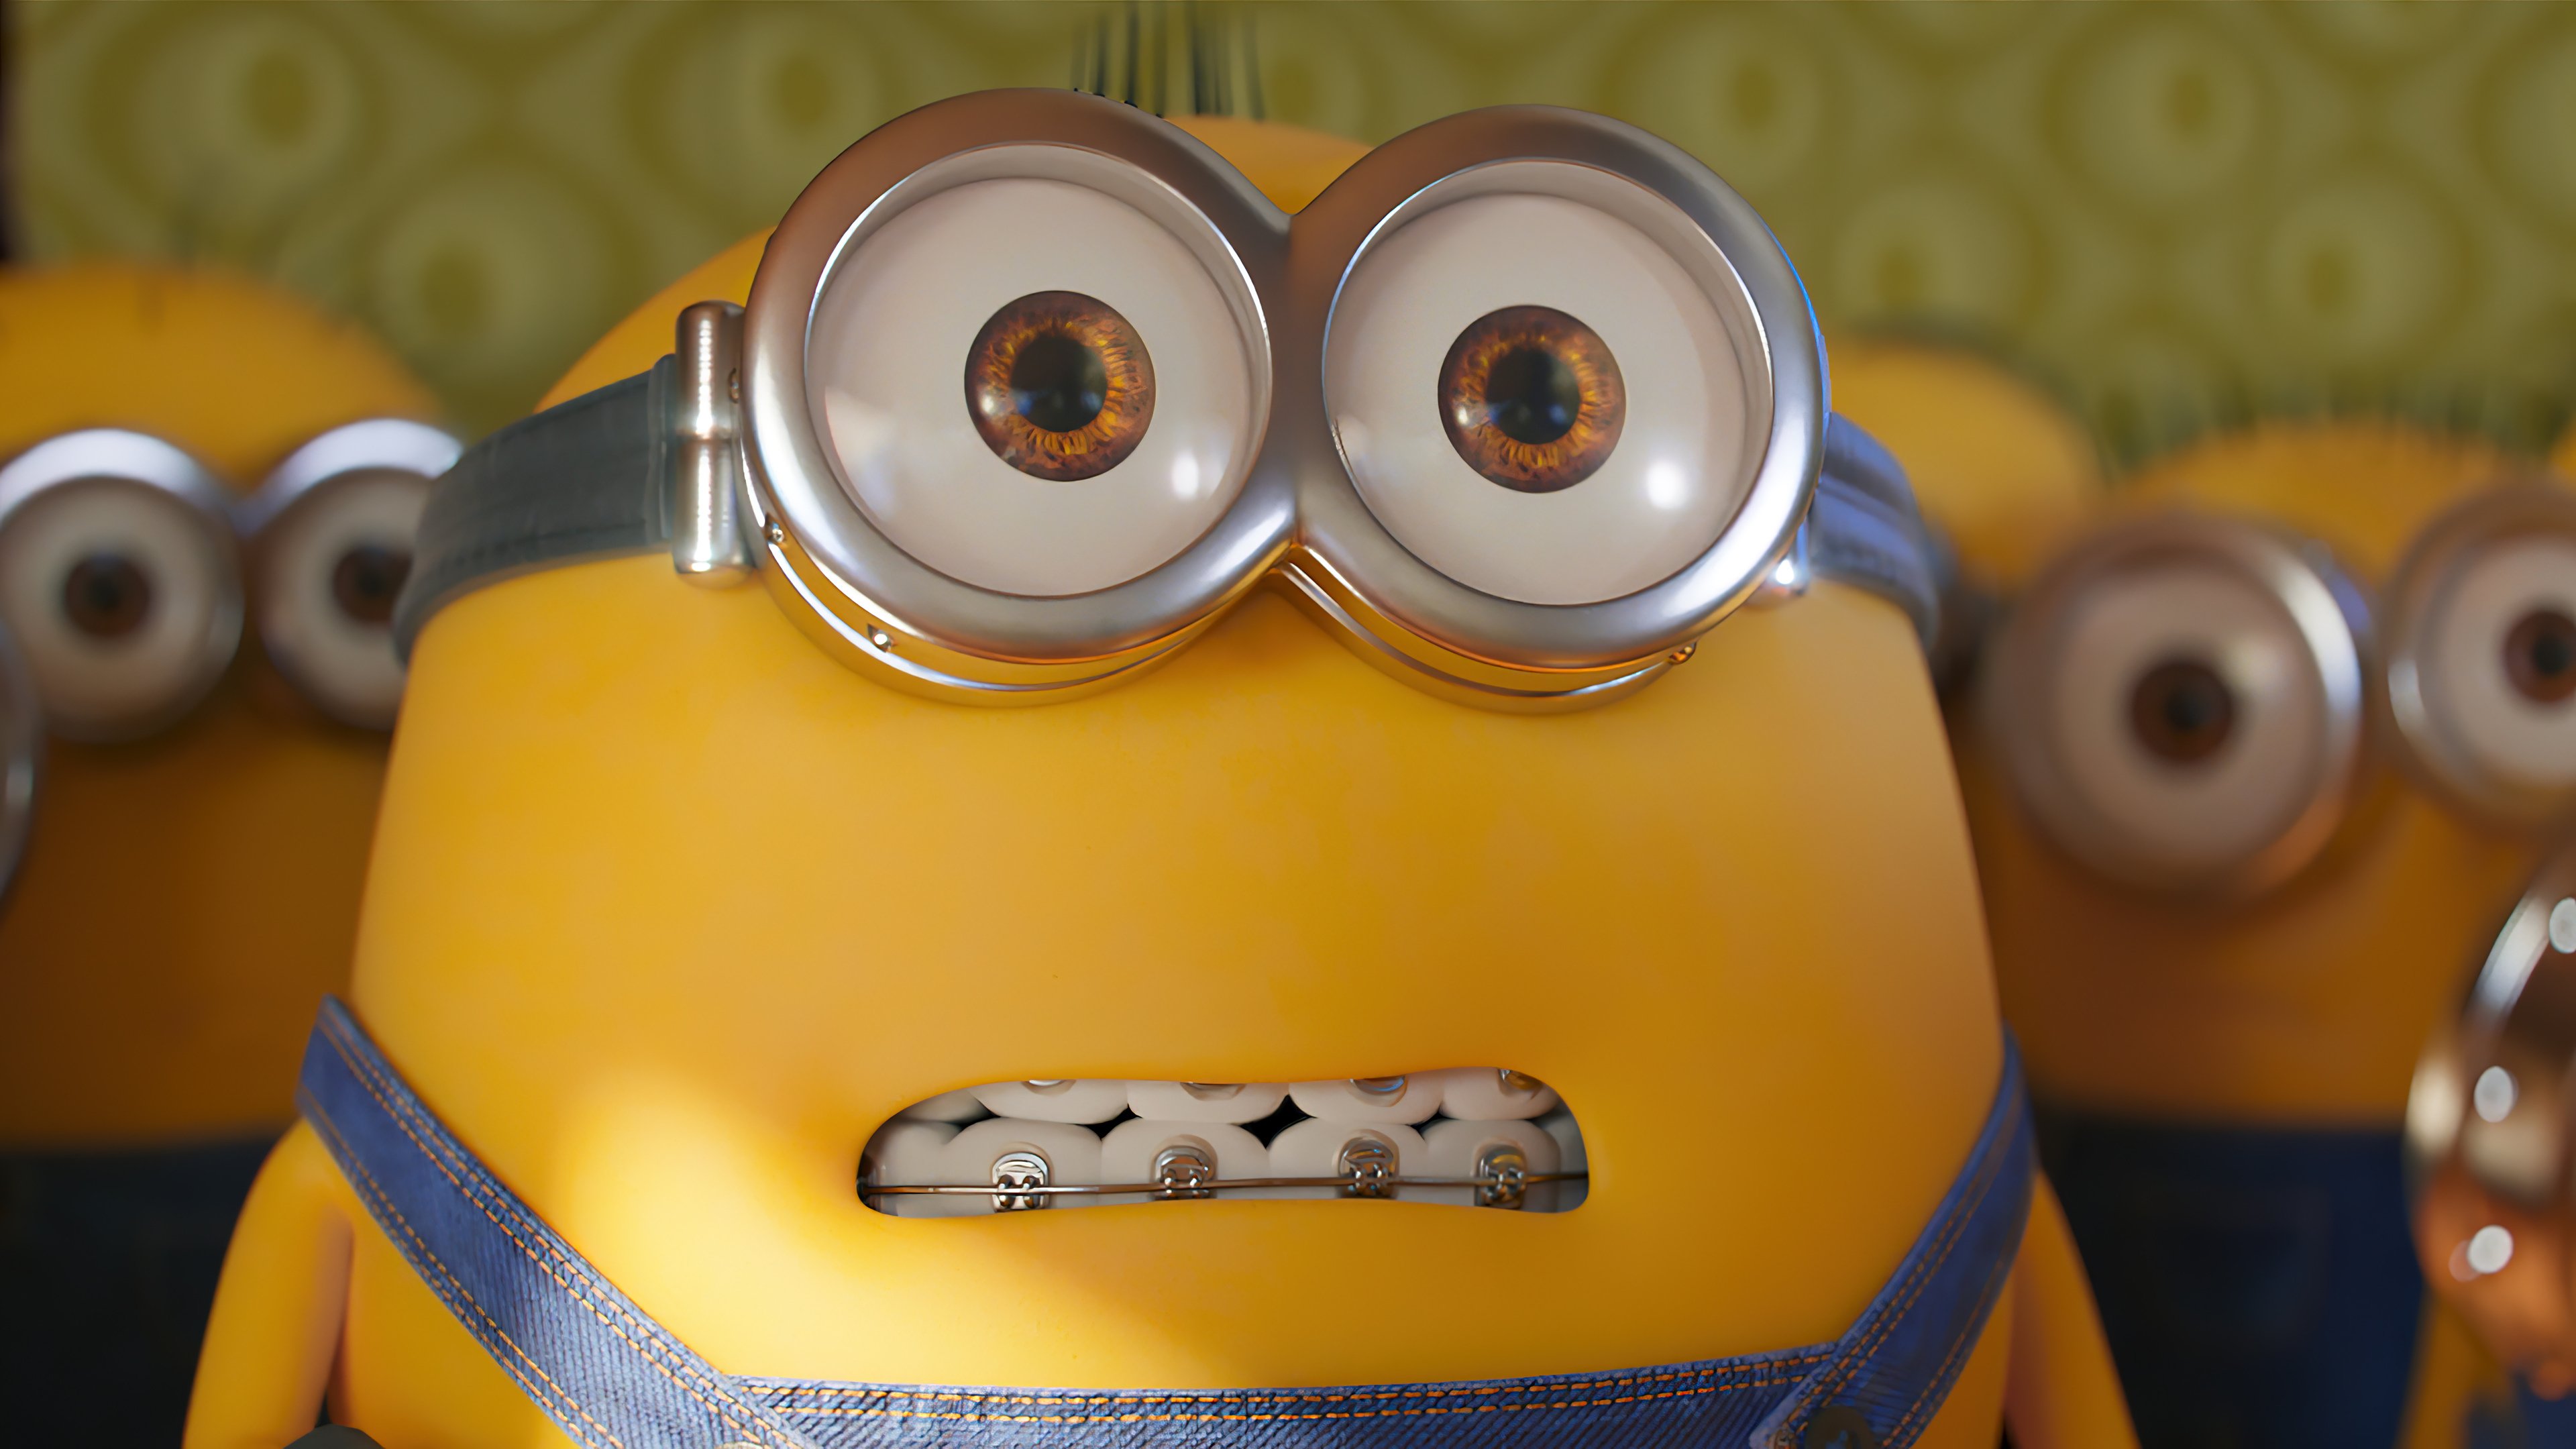 Wallpaper Bob from Minions The Rise of Gru